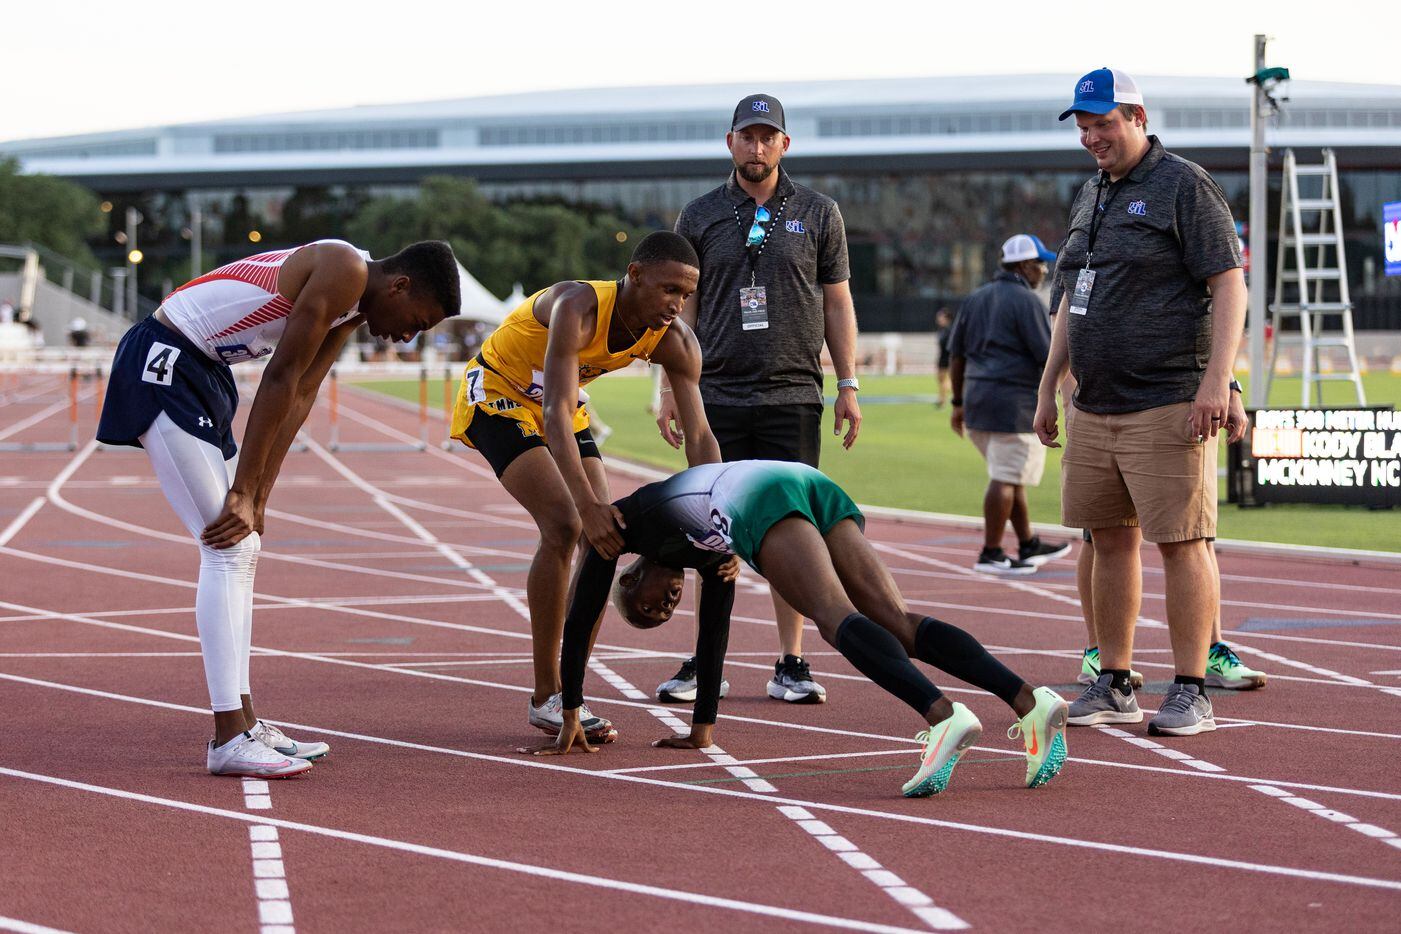 Kendrick Smallwood of Mesquite Poteet is helped up at the finish line after the boys’ 300m...